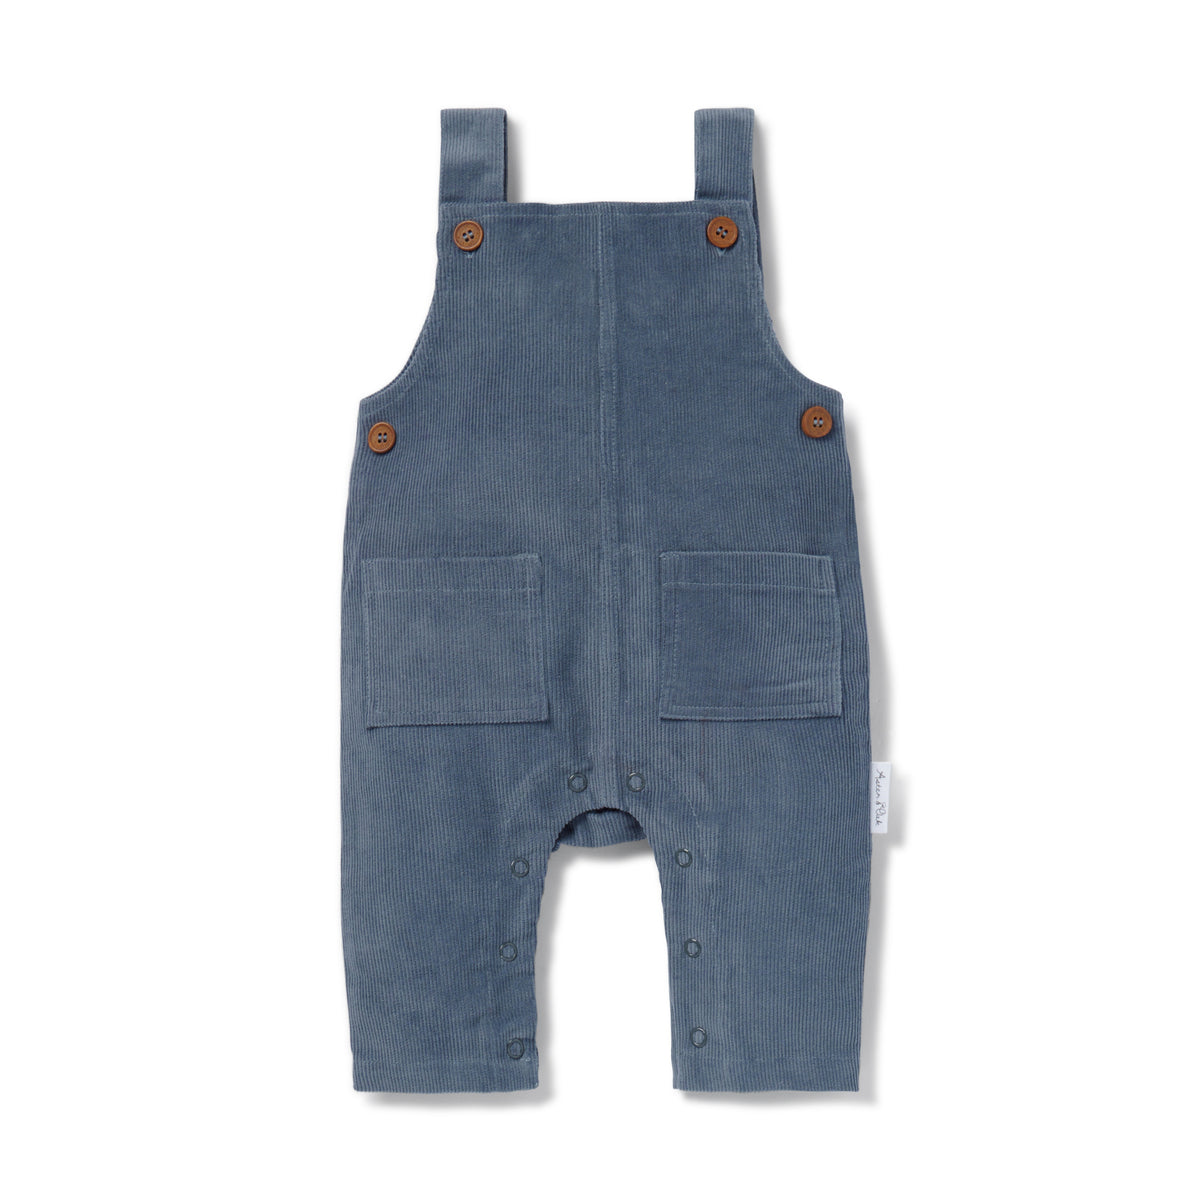 Navy Cord Overalls